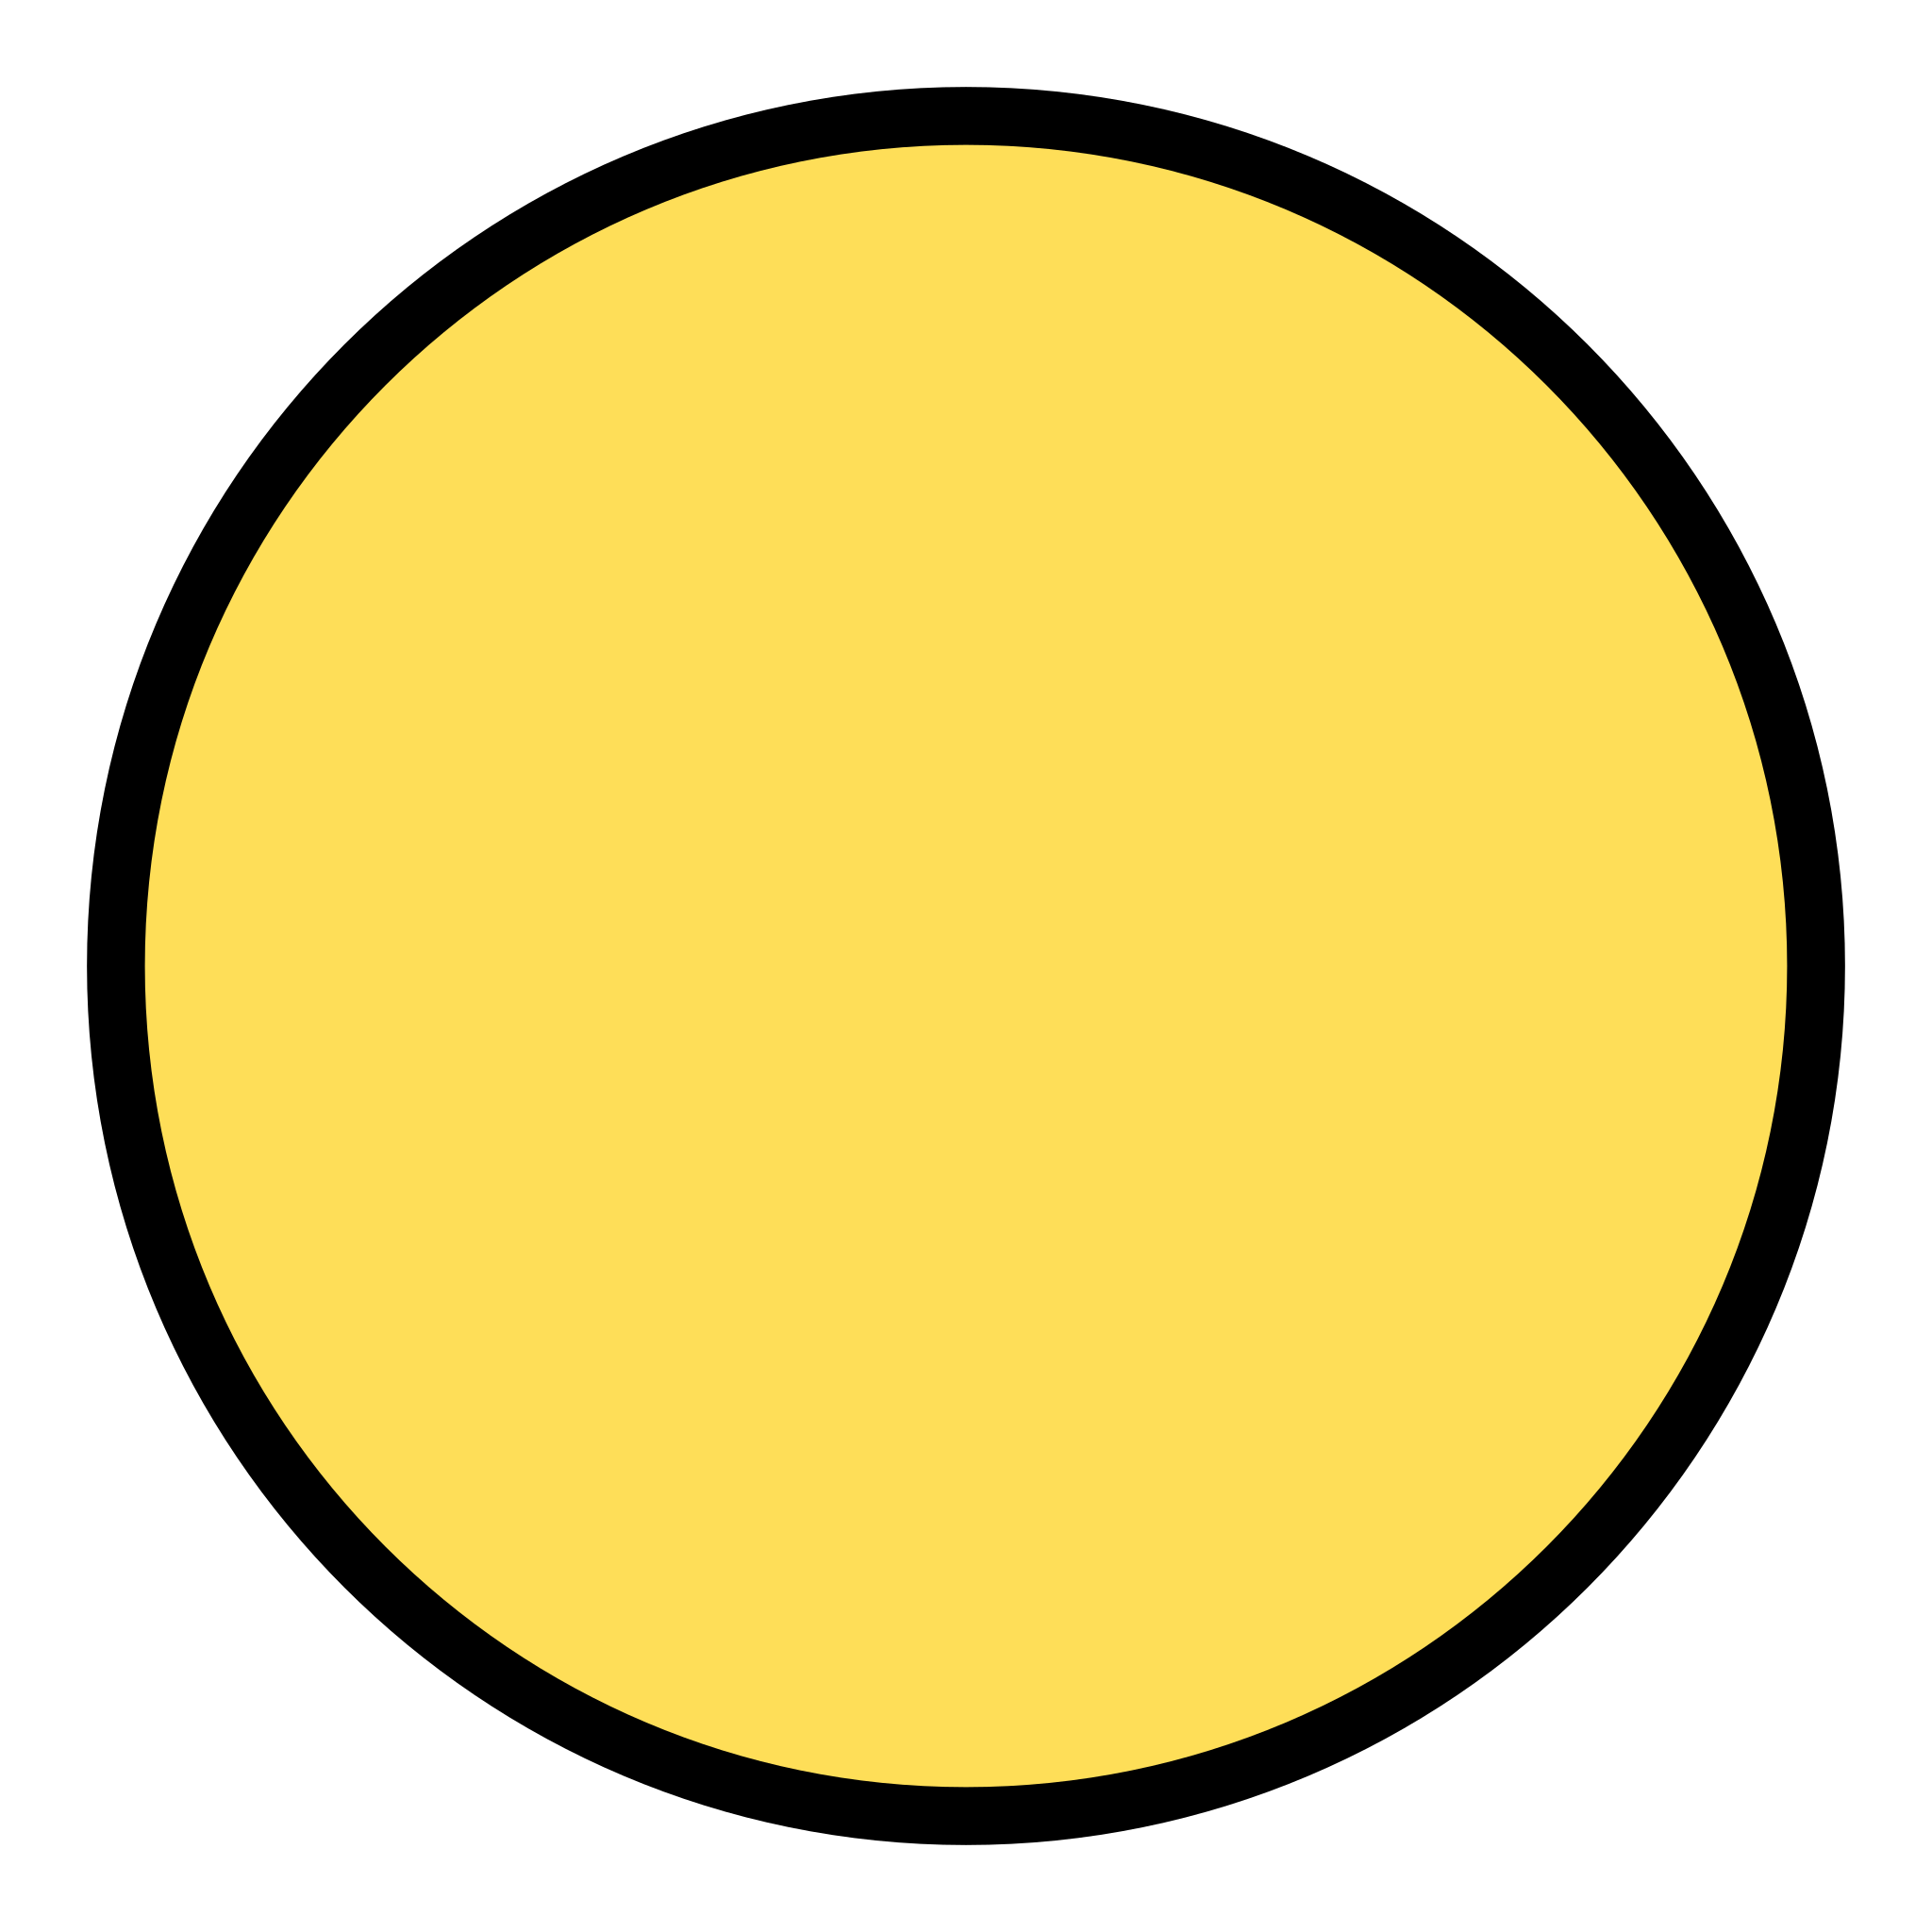 File:718smiley.svg - Wikimedia Commons